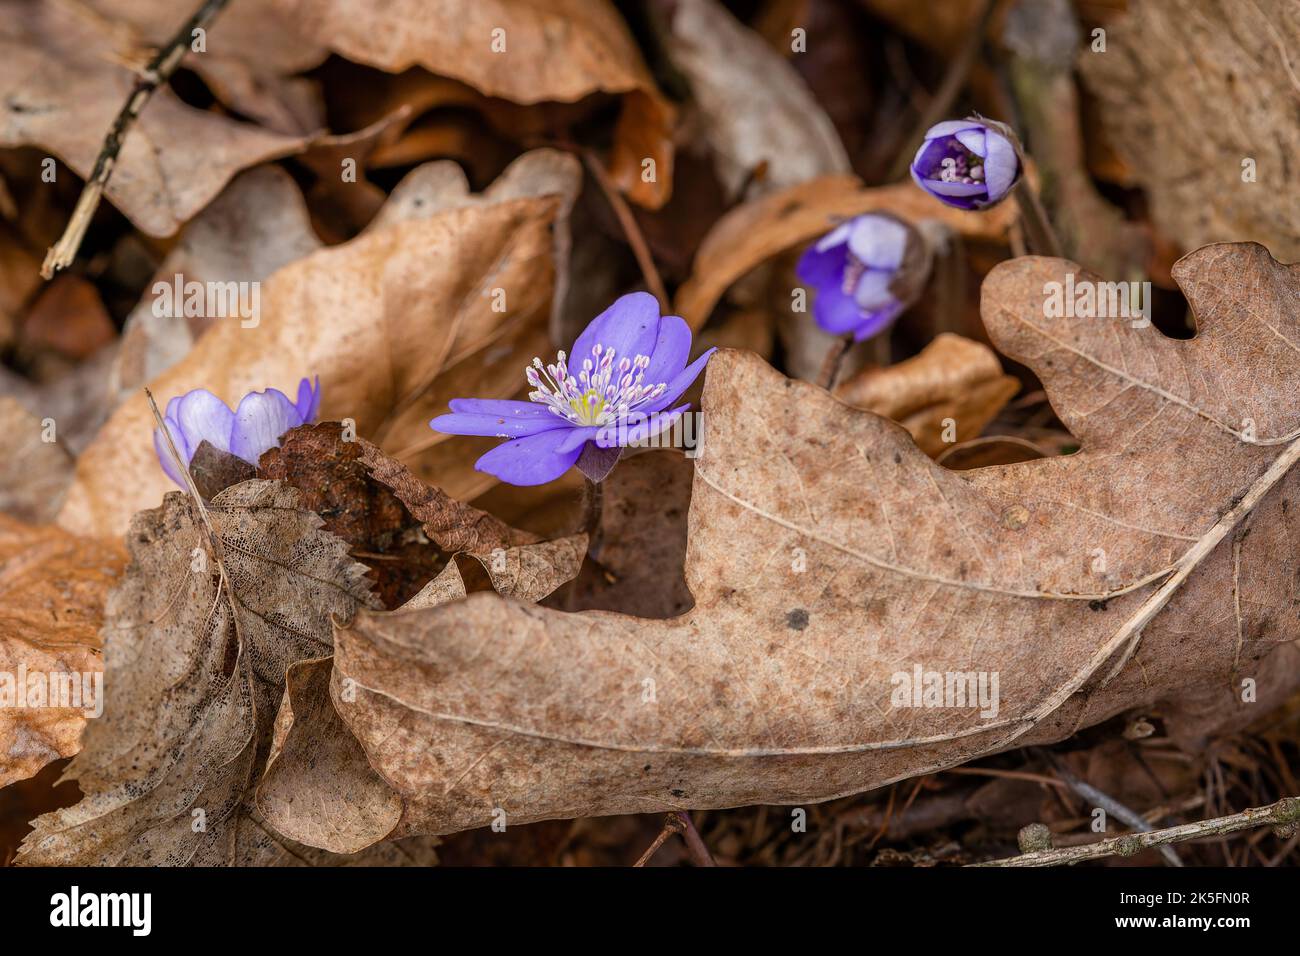 Four fresh blue flowers, the common hepatica, growing in between dry brown leaves. Spring day in the woodland. Stock Photo